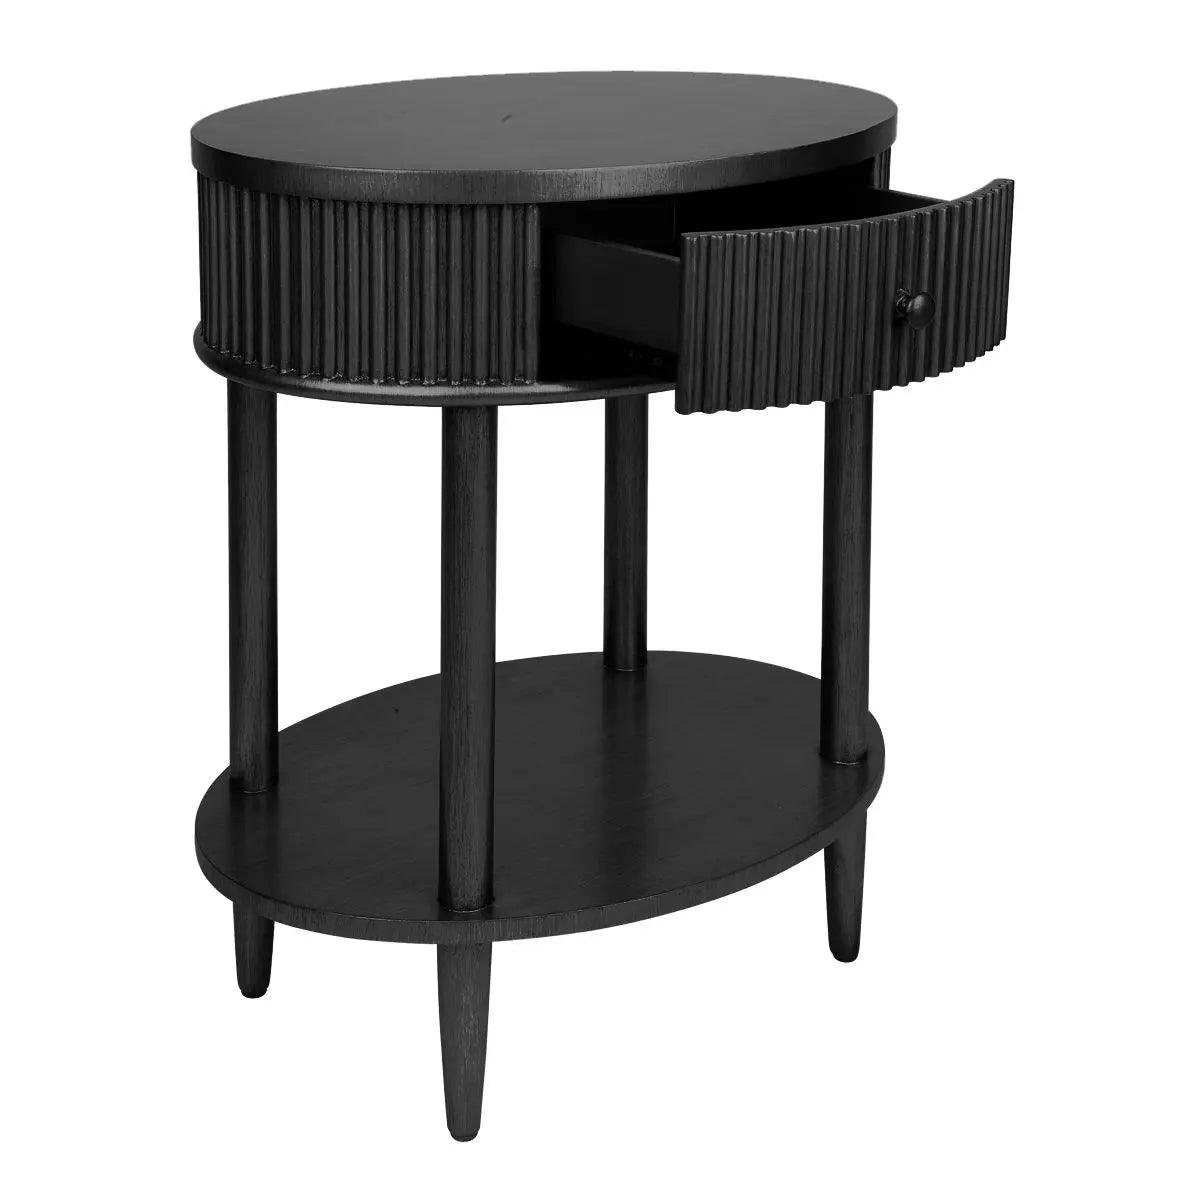 Cafe Lighting & Living Arielle Bedside Table - Small Black - Bedside table325939320294120514 2